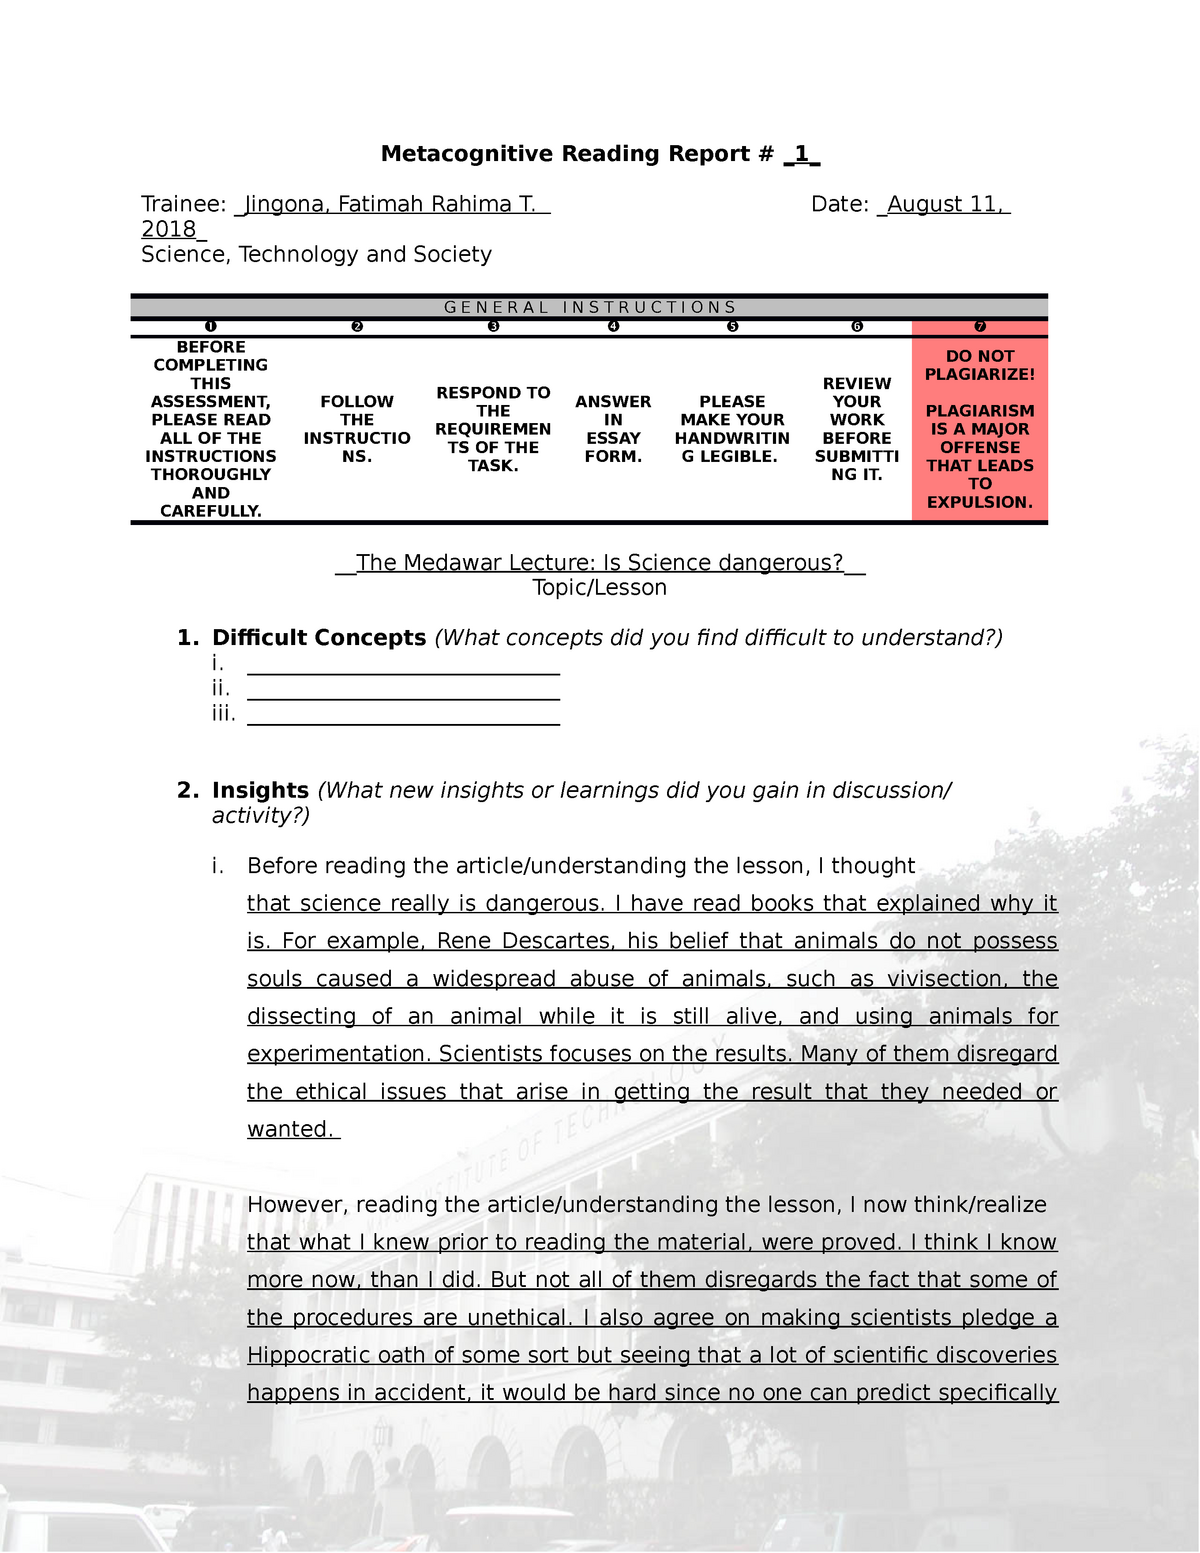 assignment 3 metacognitive reading report sts